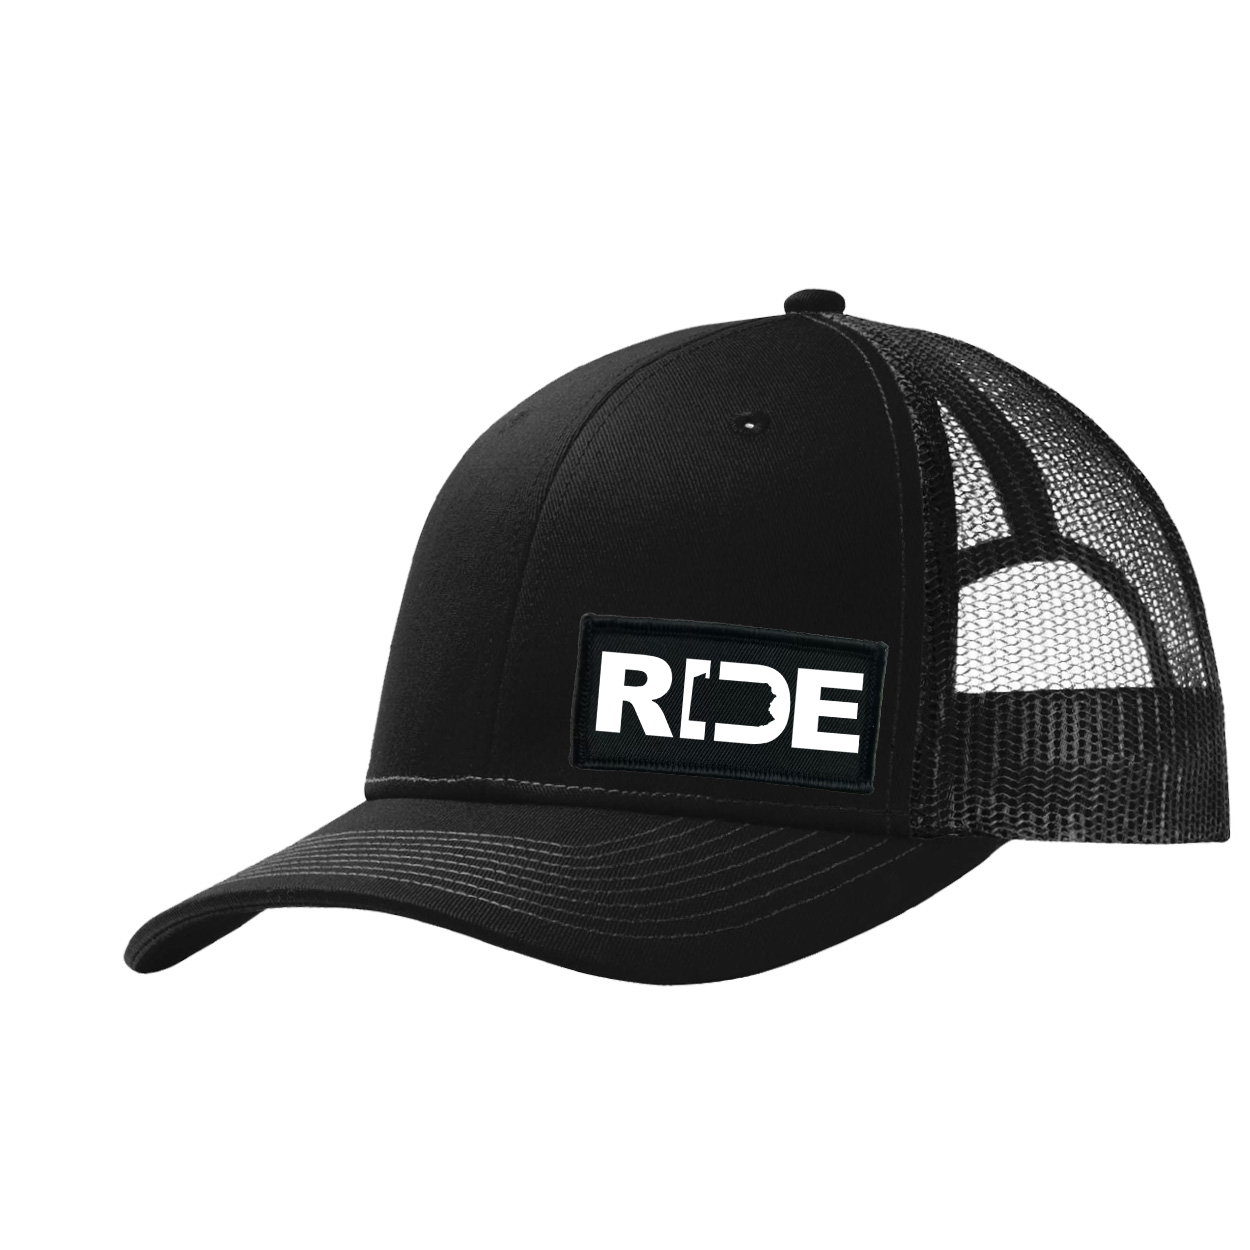 Ride Pennsylvania Night Out Woven Patch Snapback Trucker Hat Black (White Logo)